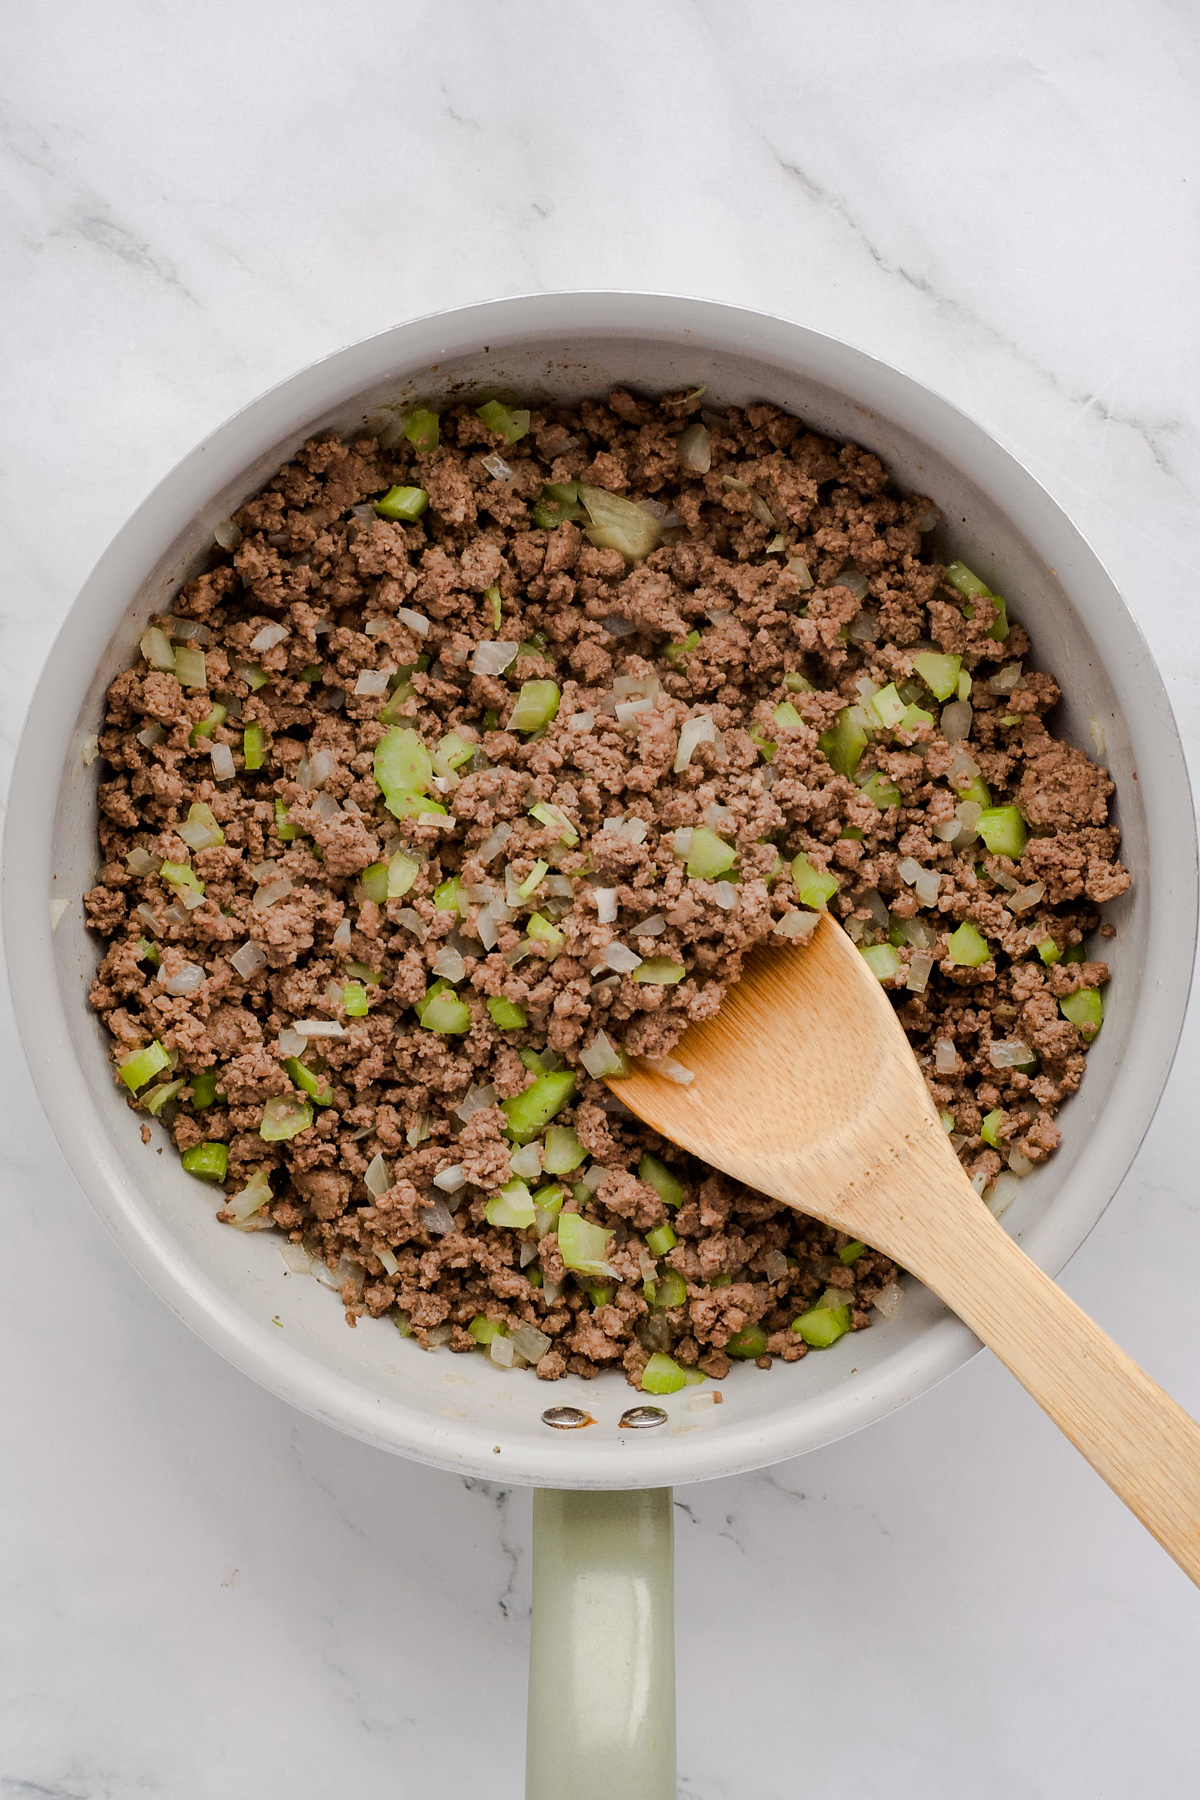 Ground beef, celery and onion cooked in skillet with wooden spoon